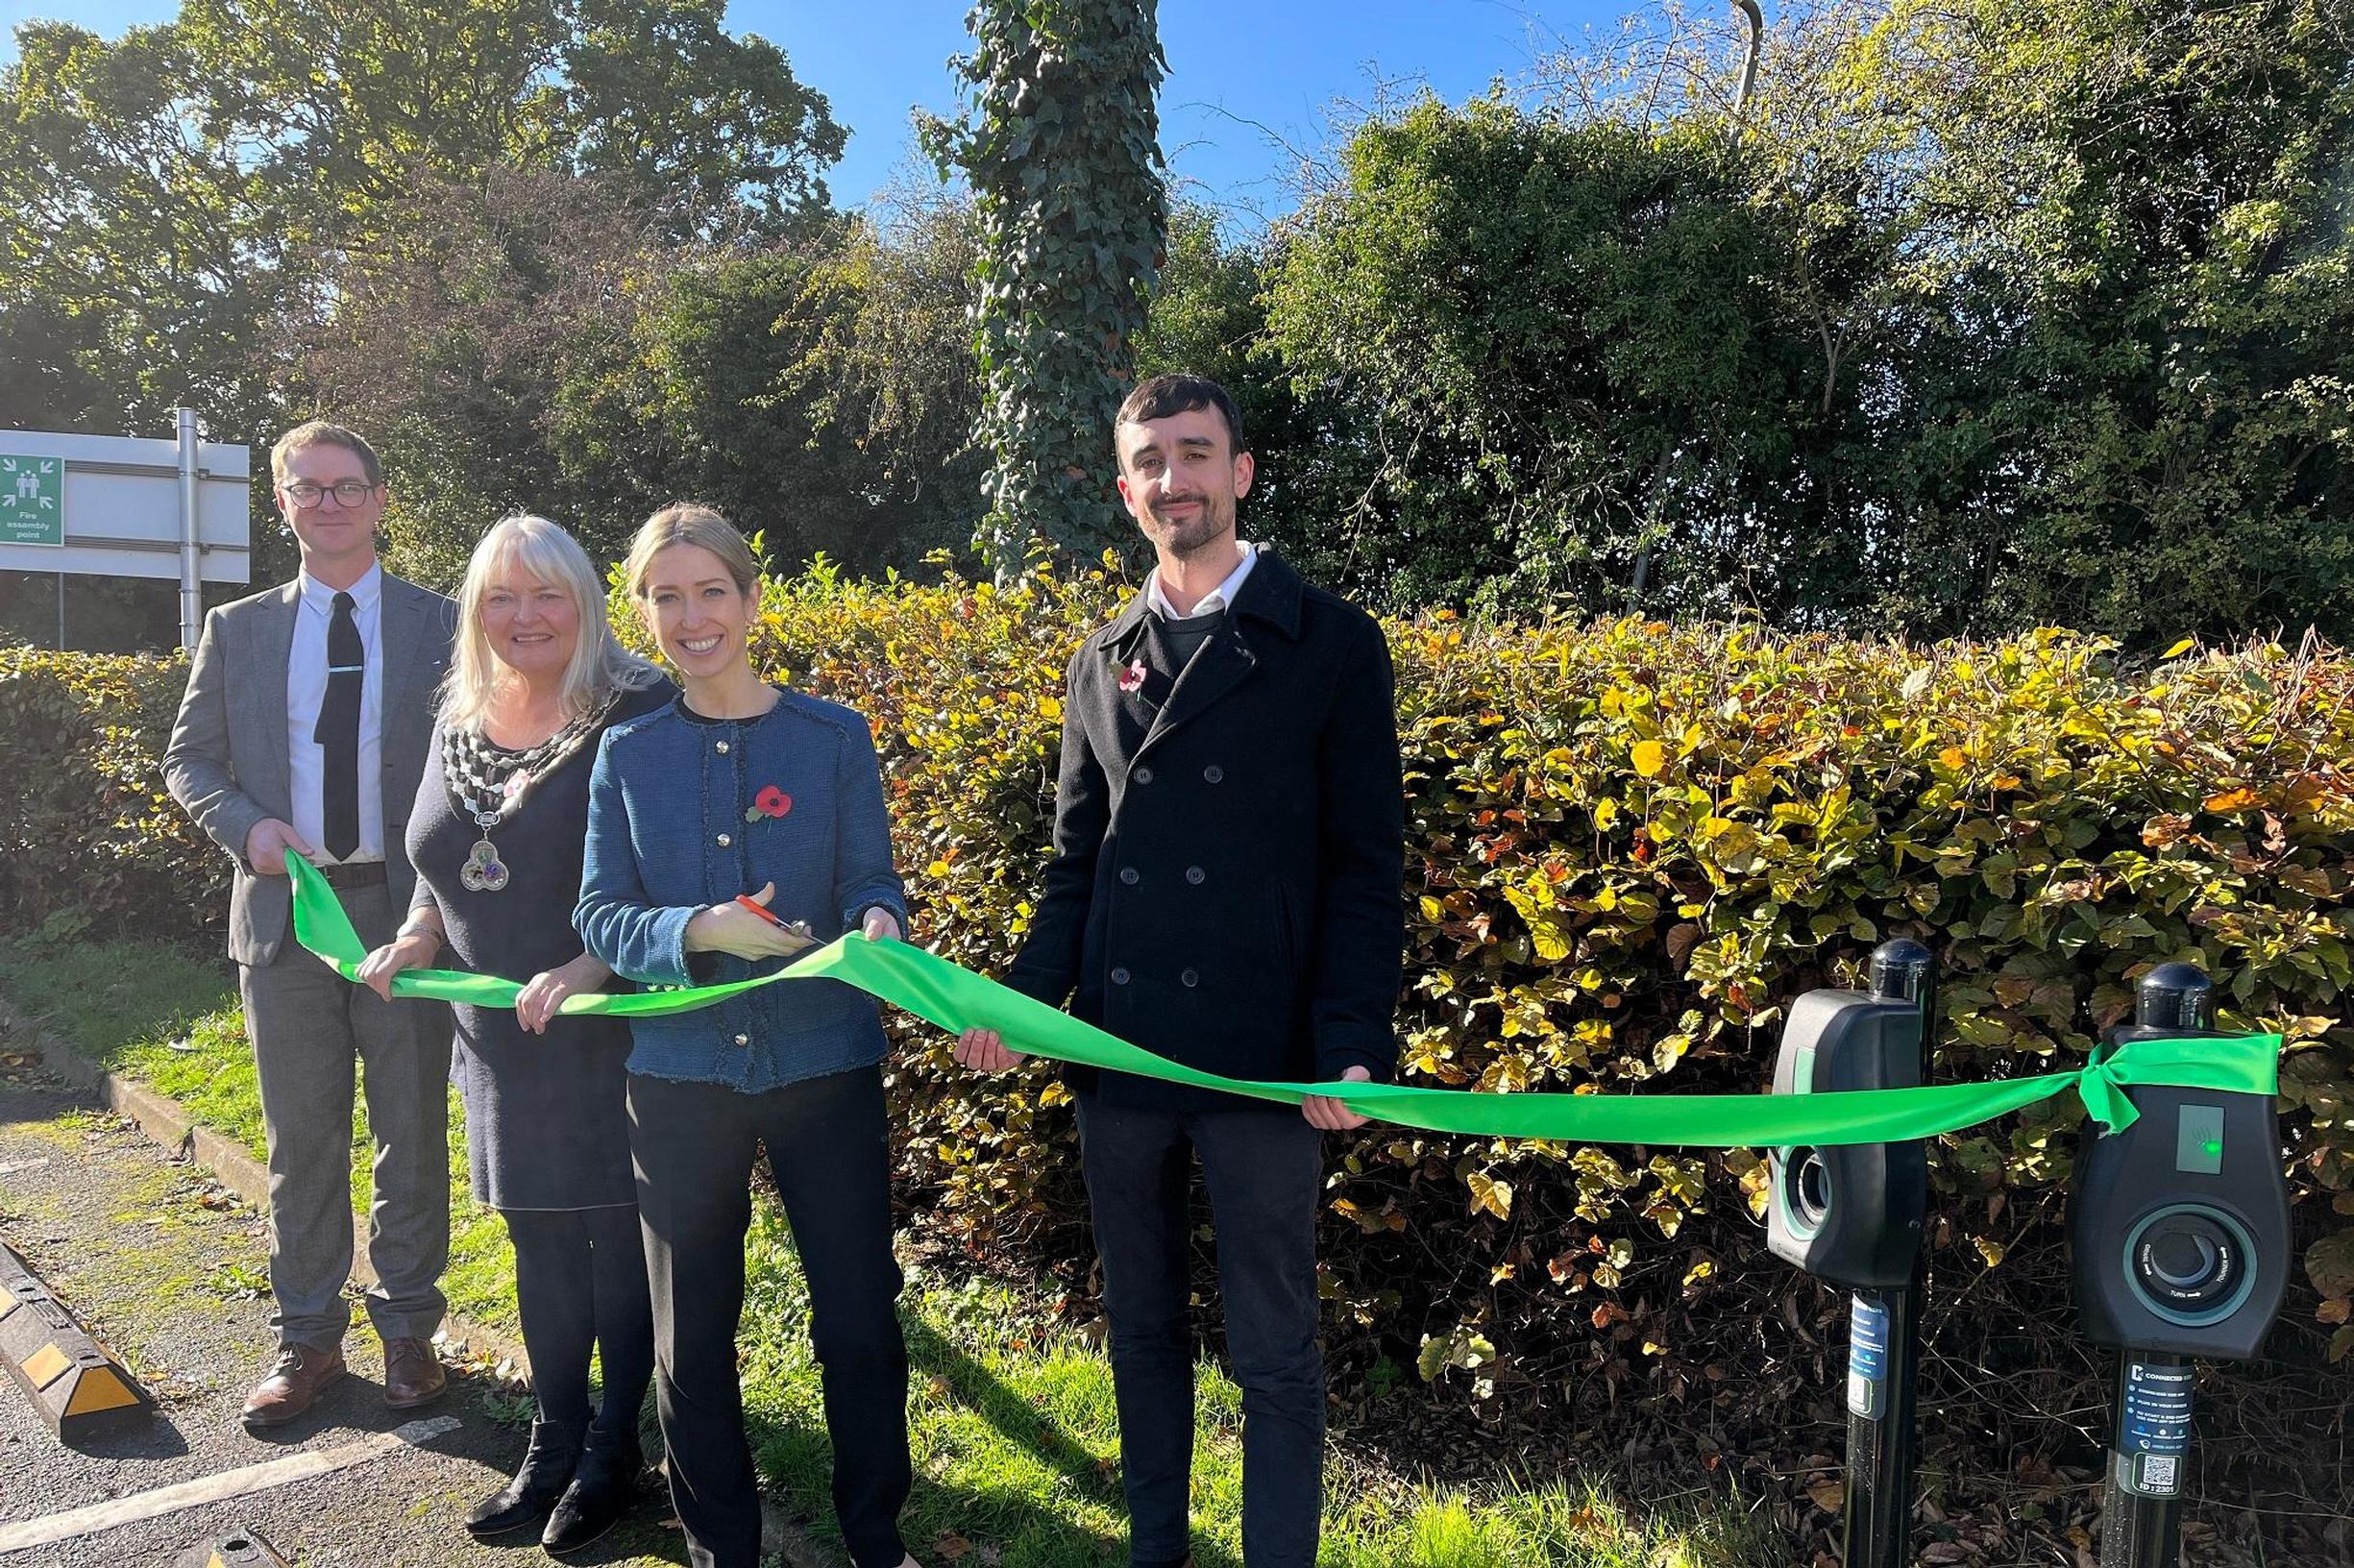 Laura Trott MP opens the Swanley chargepoints